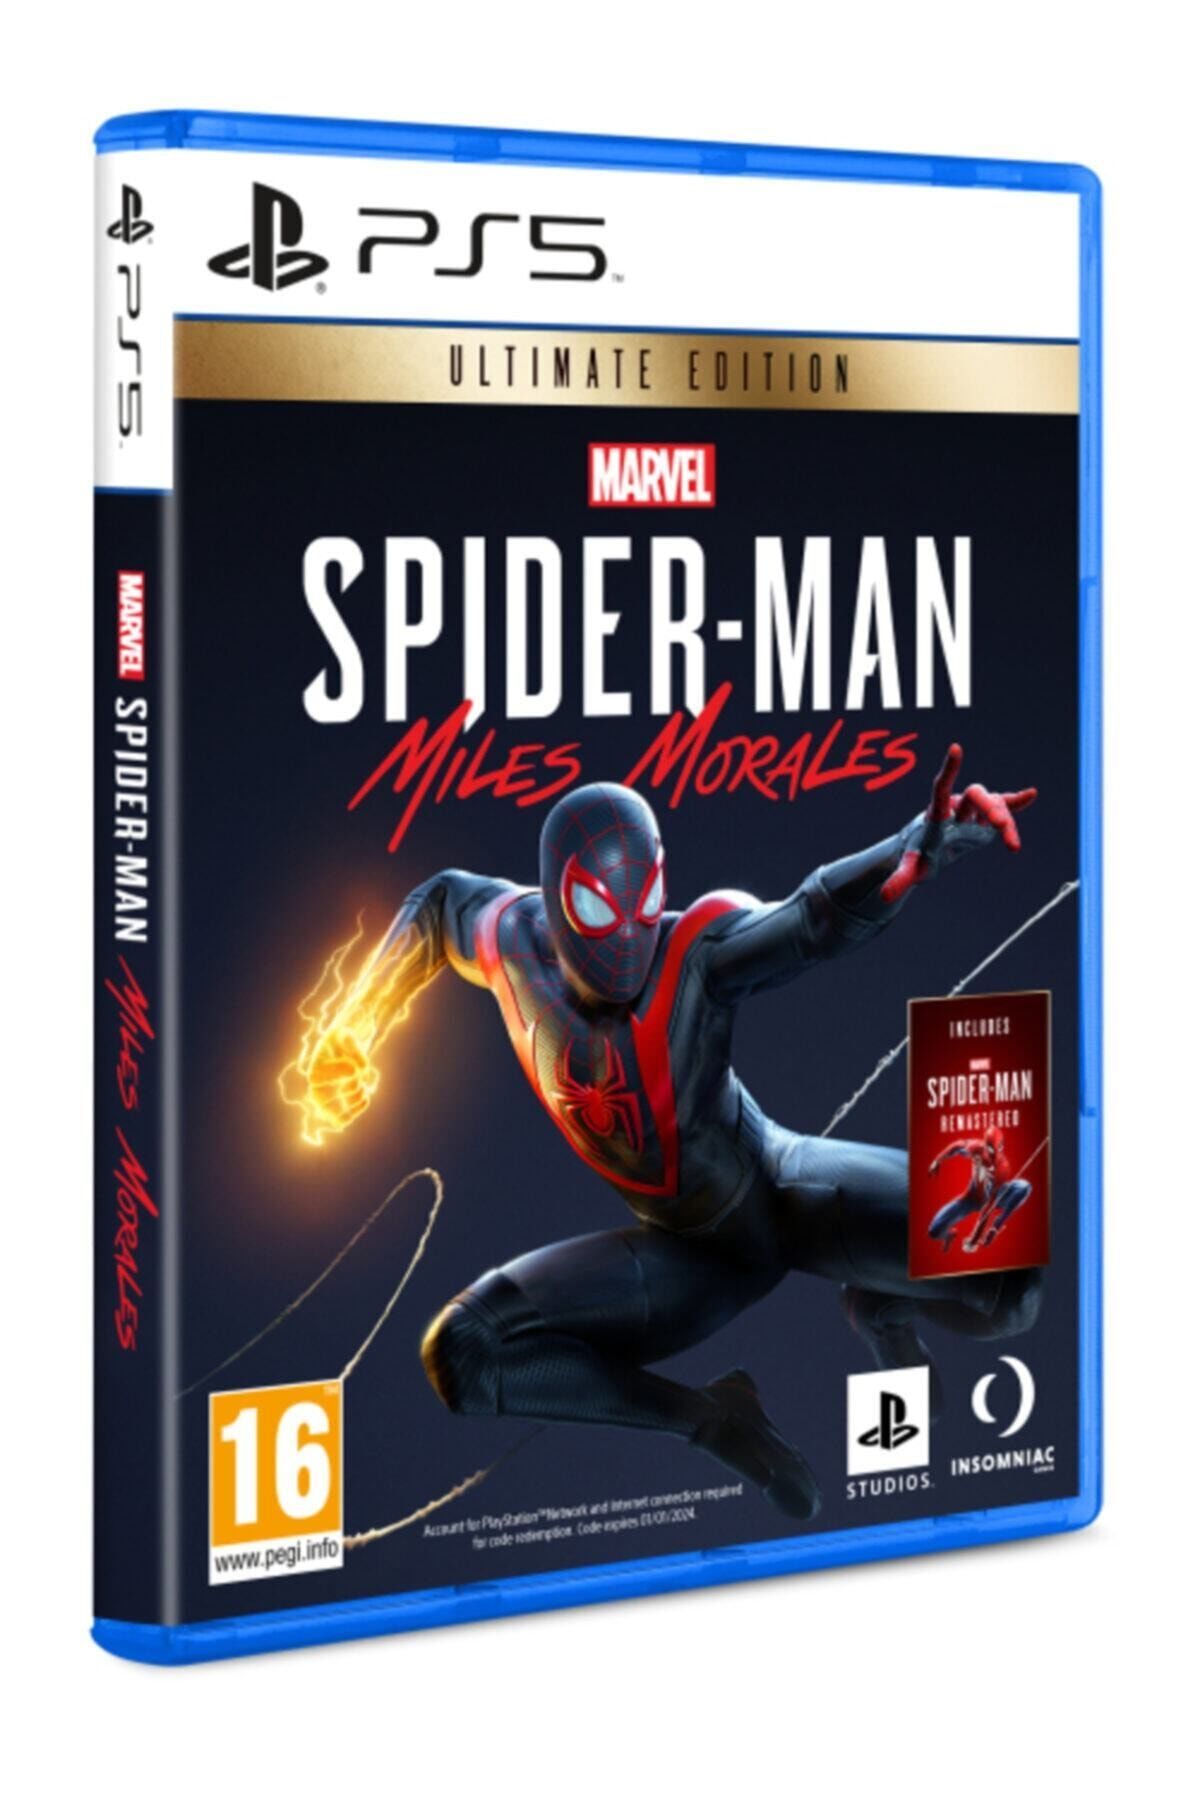 SPIDER MAN MILES MORALES ULTIMATE EDITION - PS5 OYUN